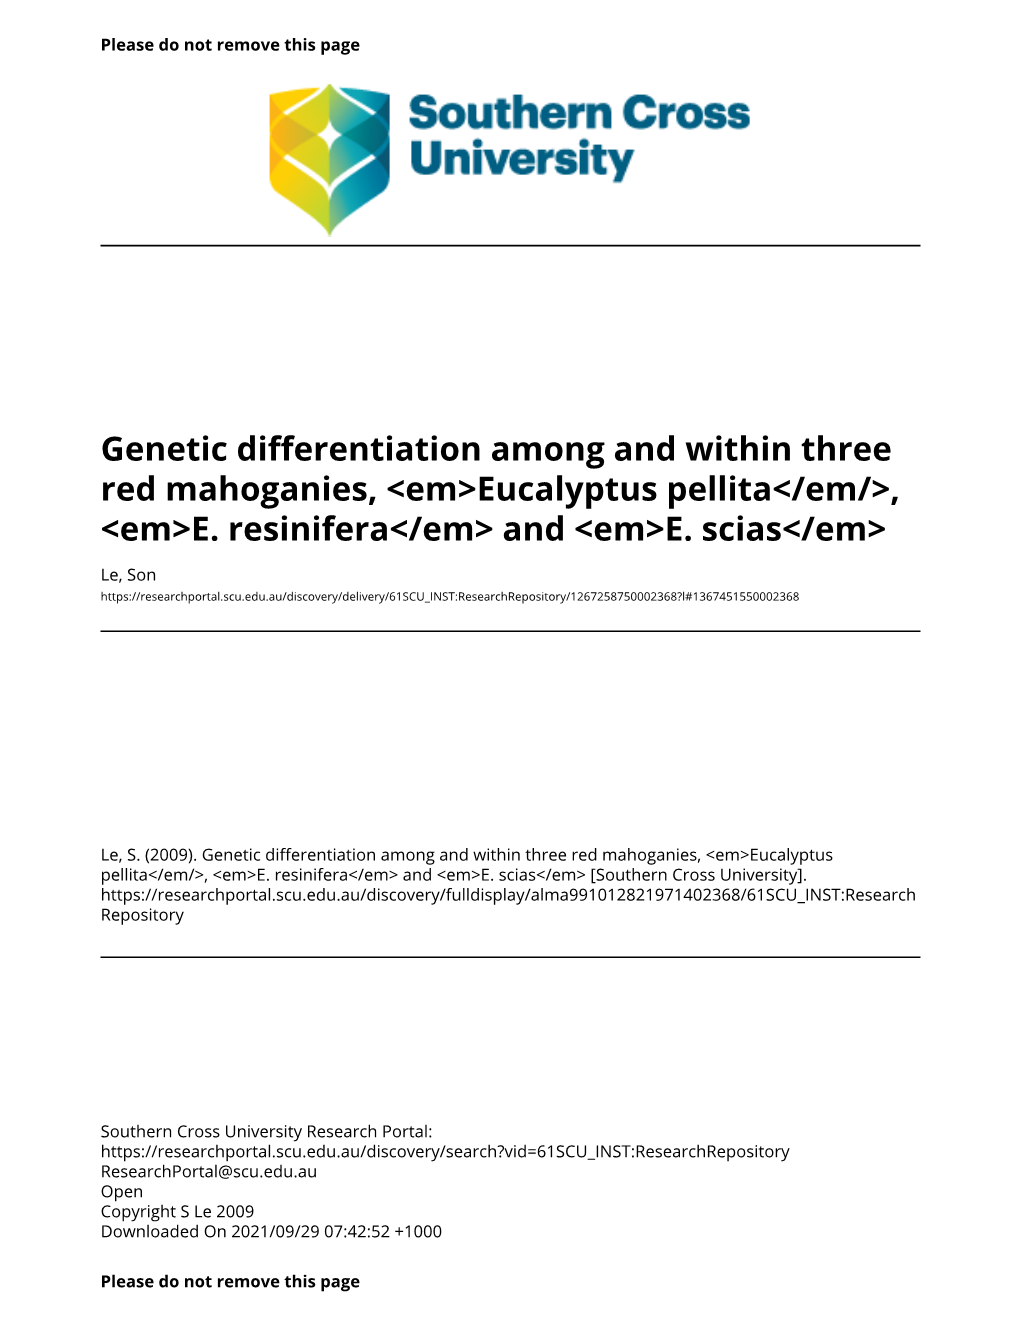 Genetic Differentiation Among and Within Three Red Mahoganies